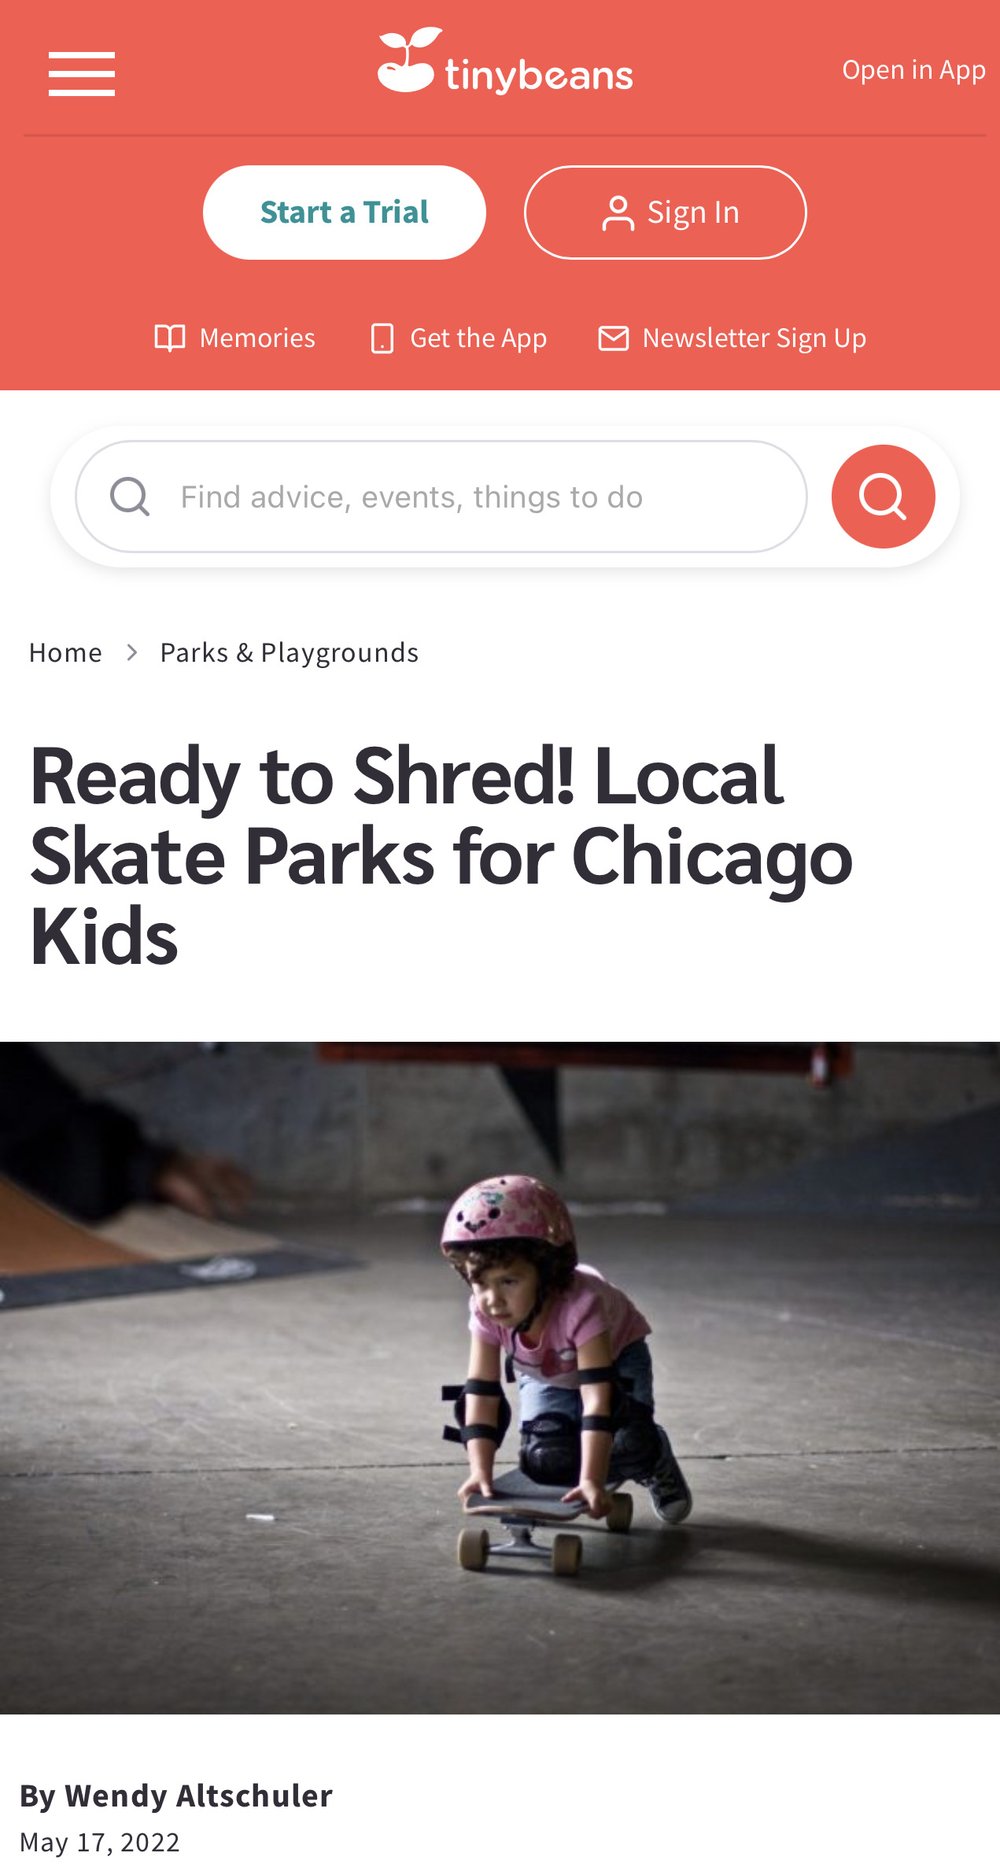 Ready to Shred! Local Skate Parks for Chicago Kids